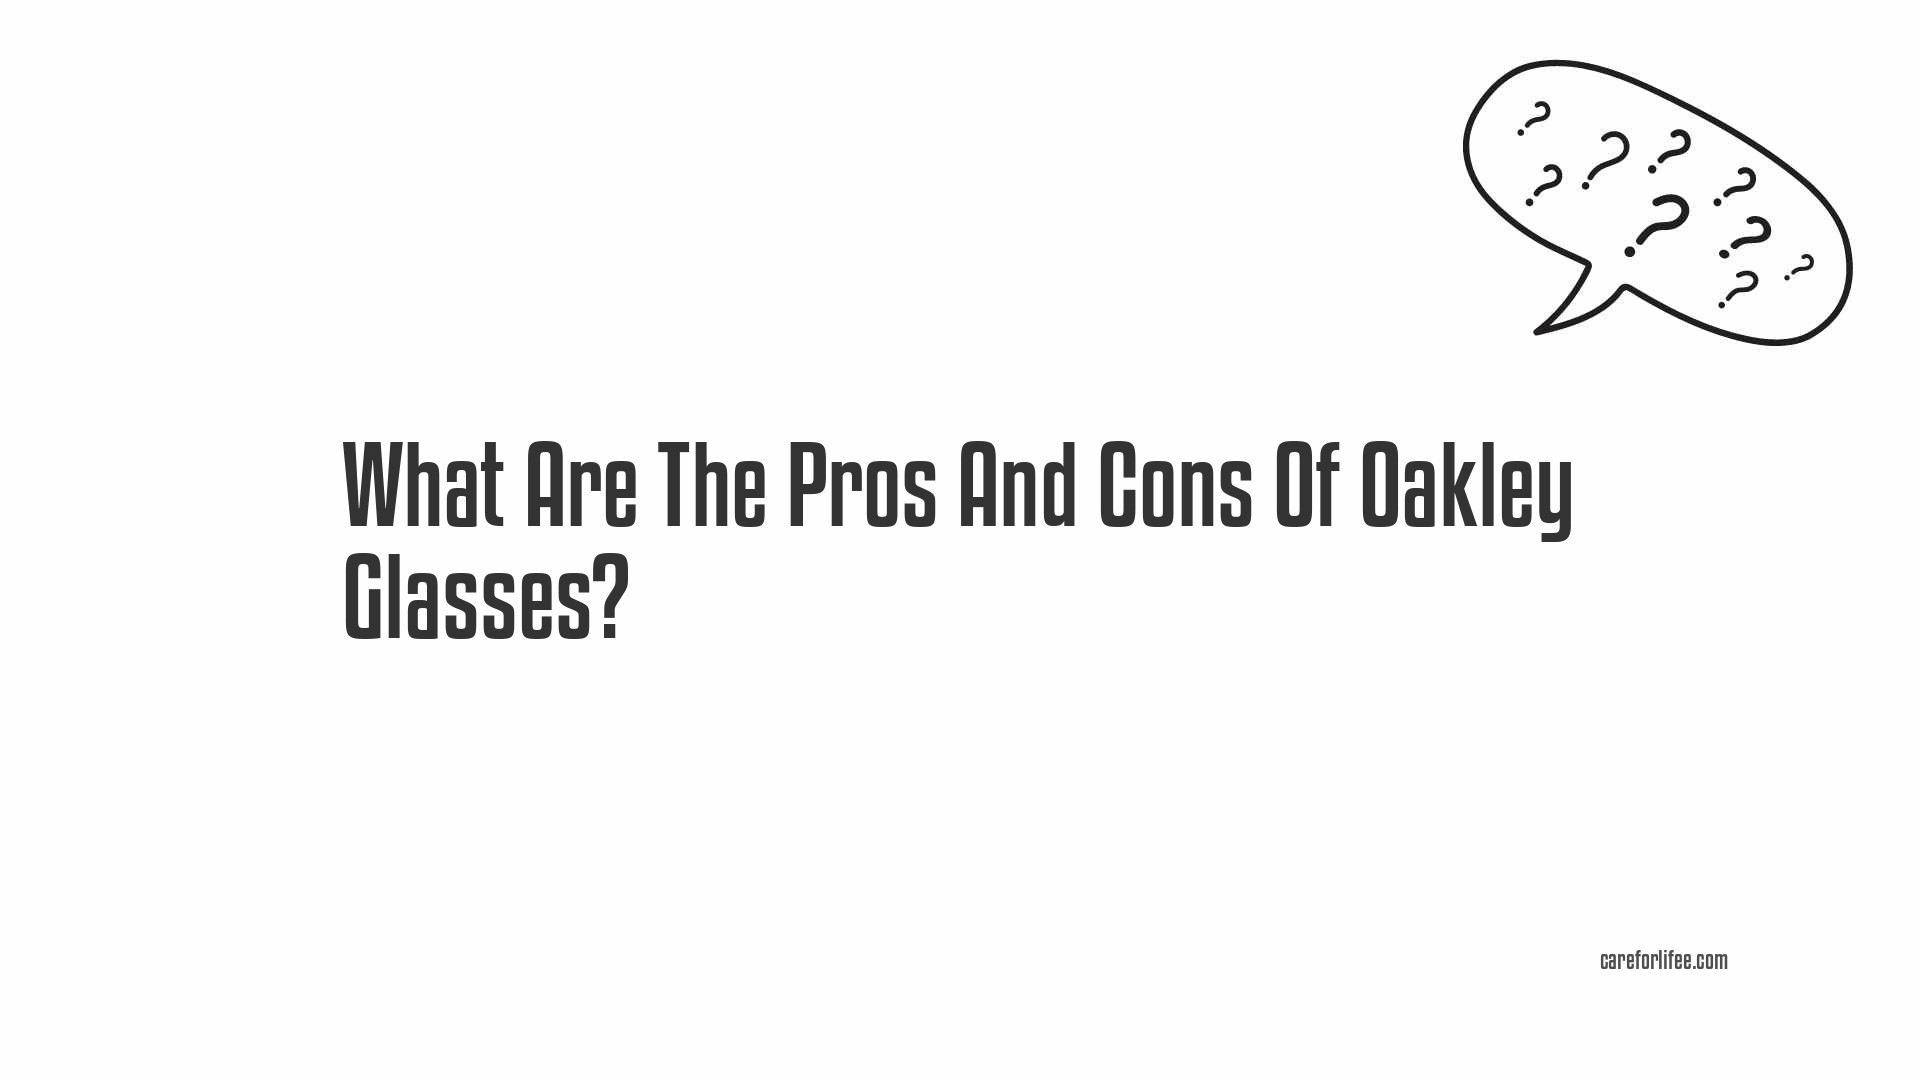 What Are The Pros And Cons Of Oakley Glasses?